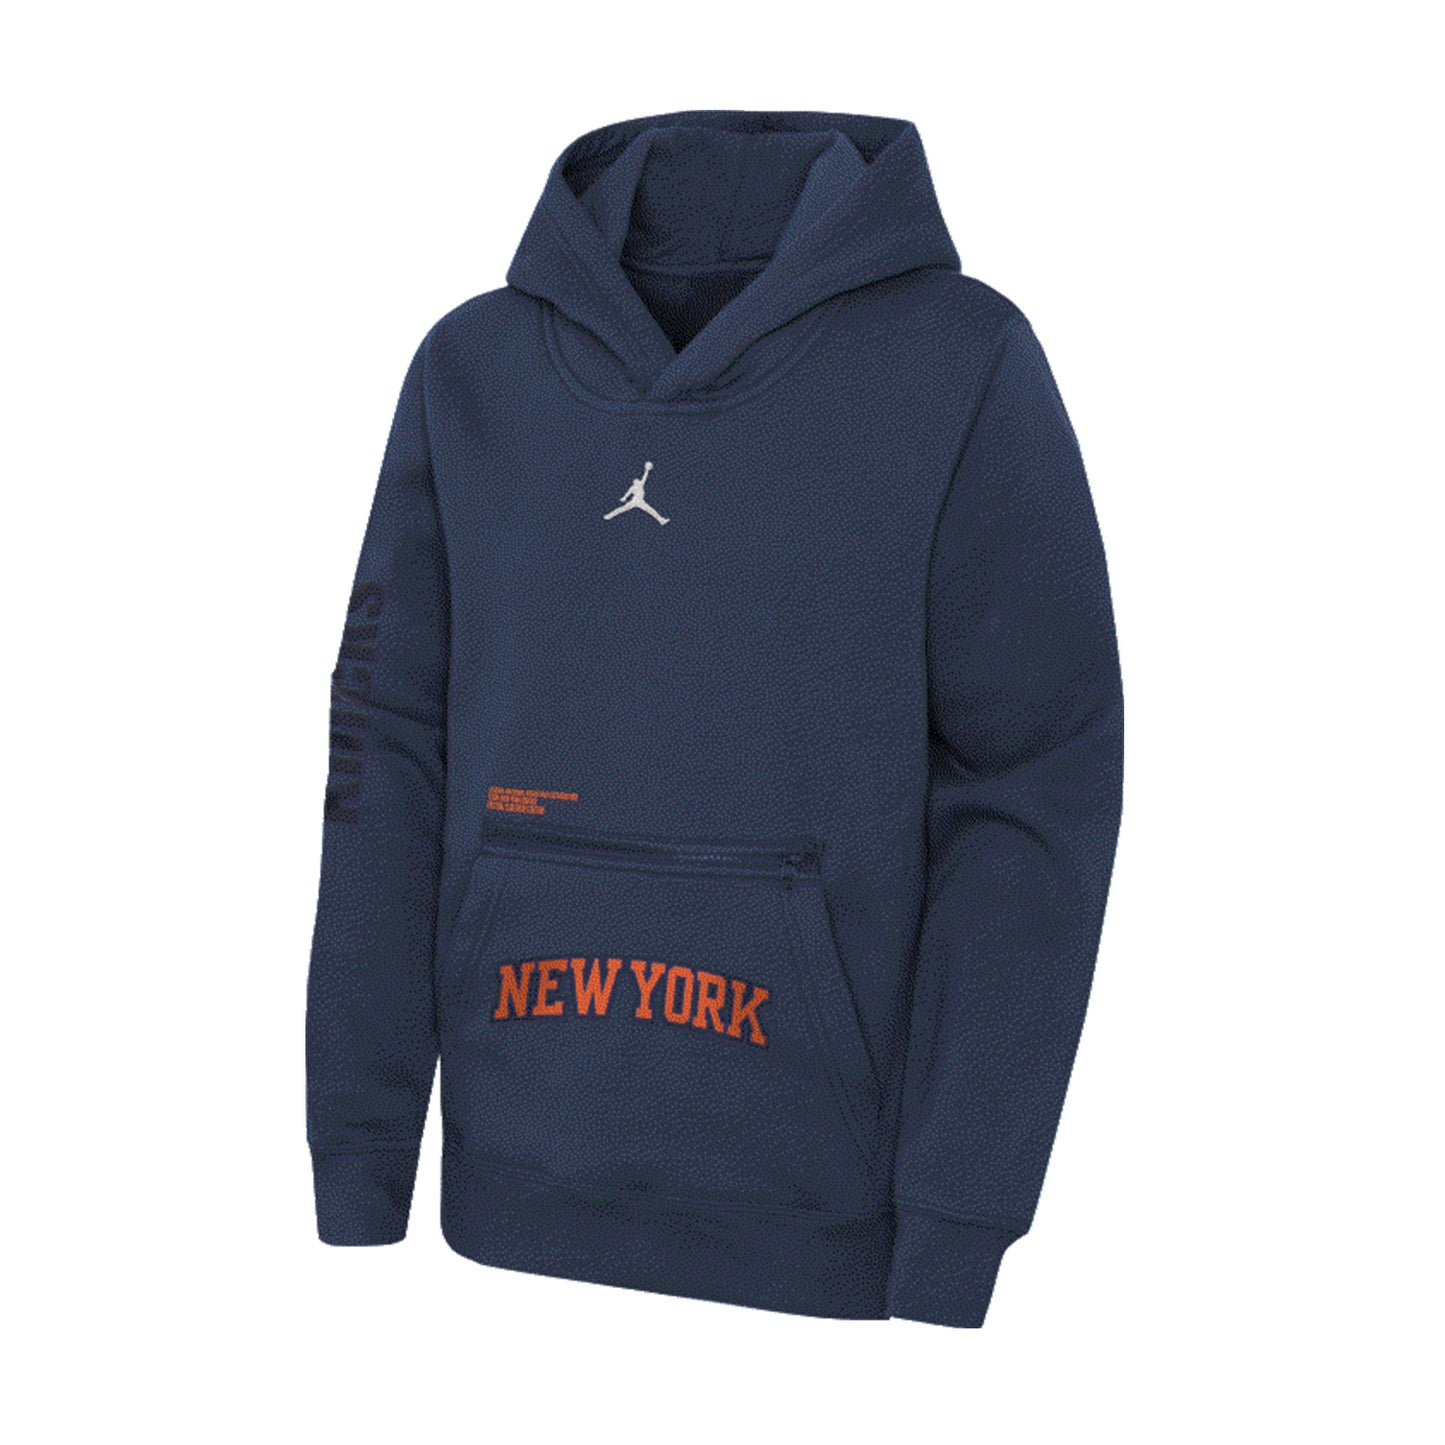 Youth Statement 22-23 Jordan Brand Courtside Hood In Blue - Front View